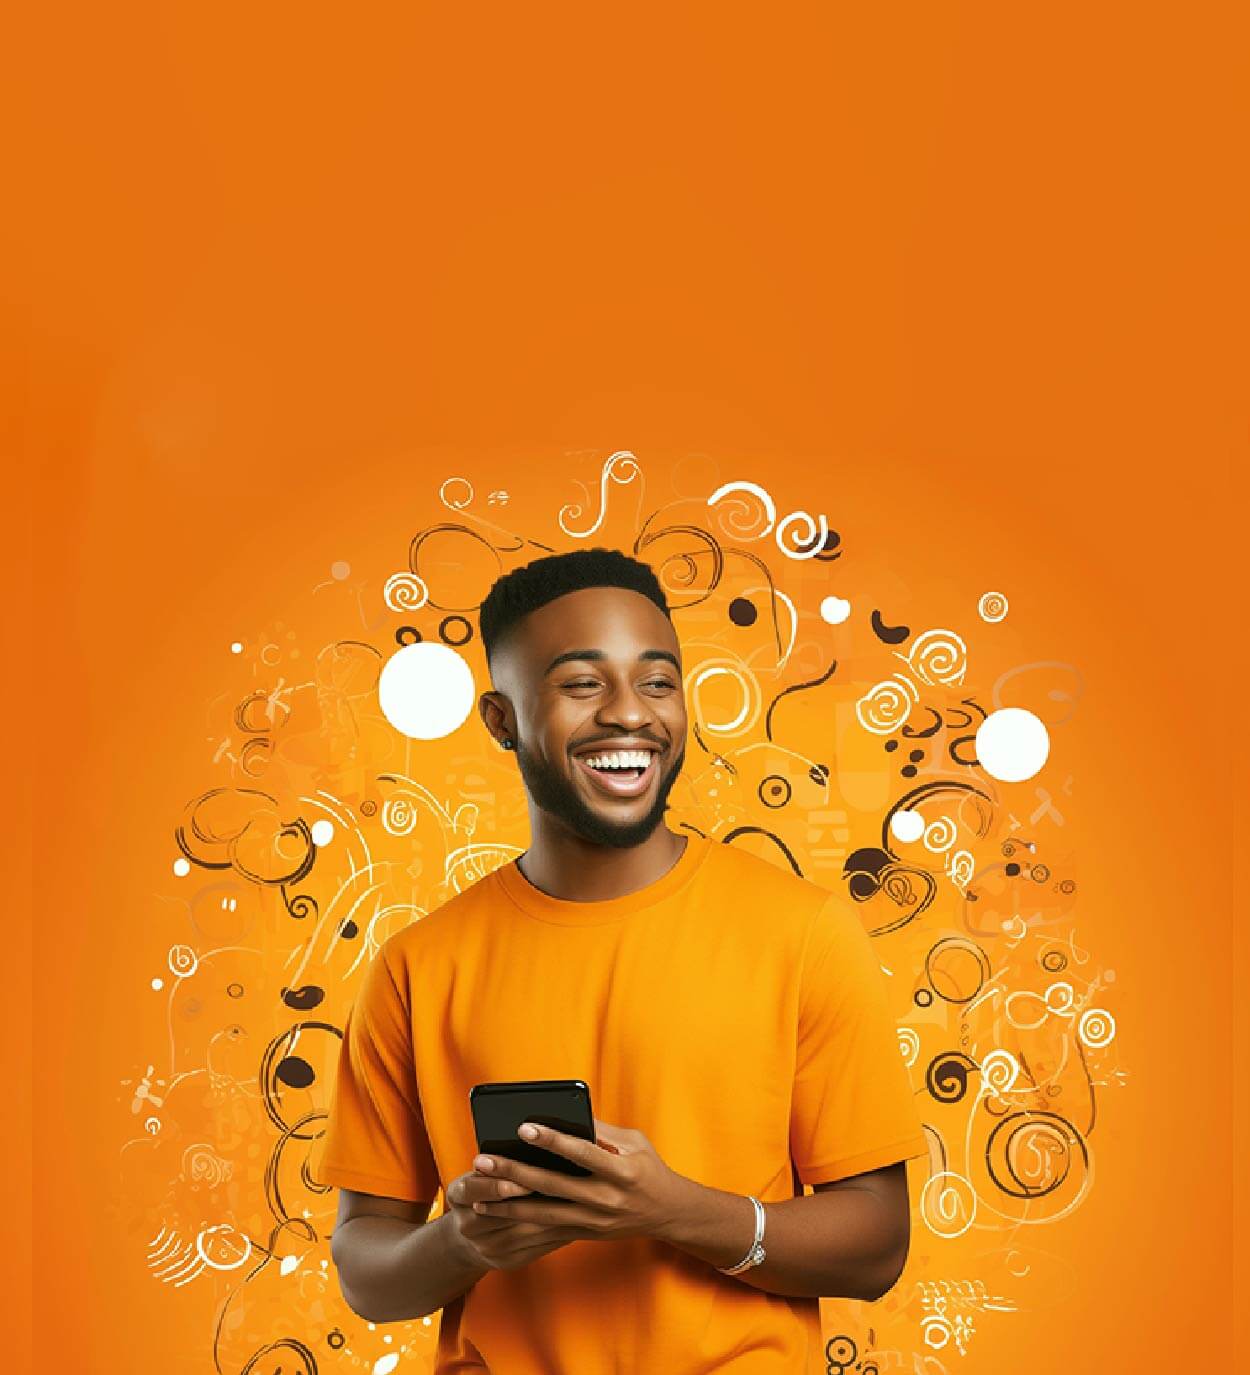 undefined Want FREE Airtime & Data?